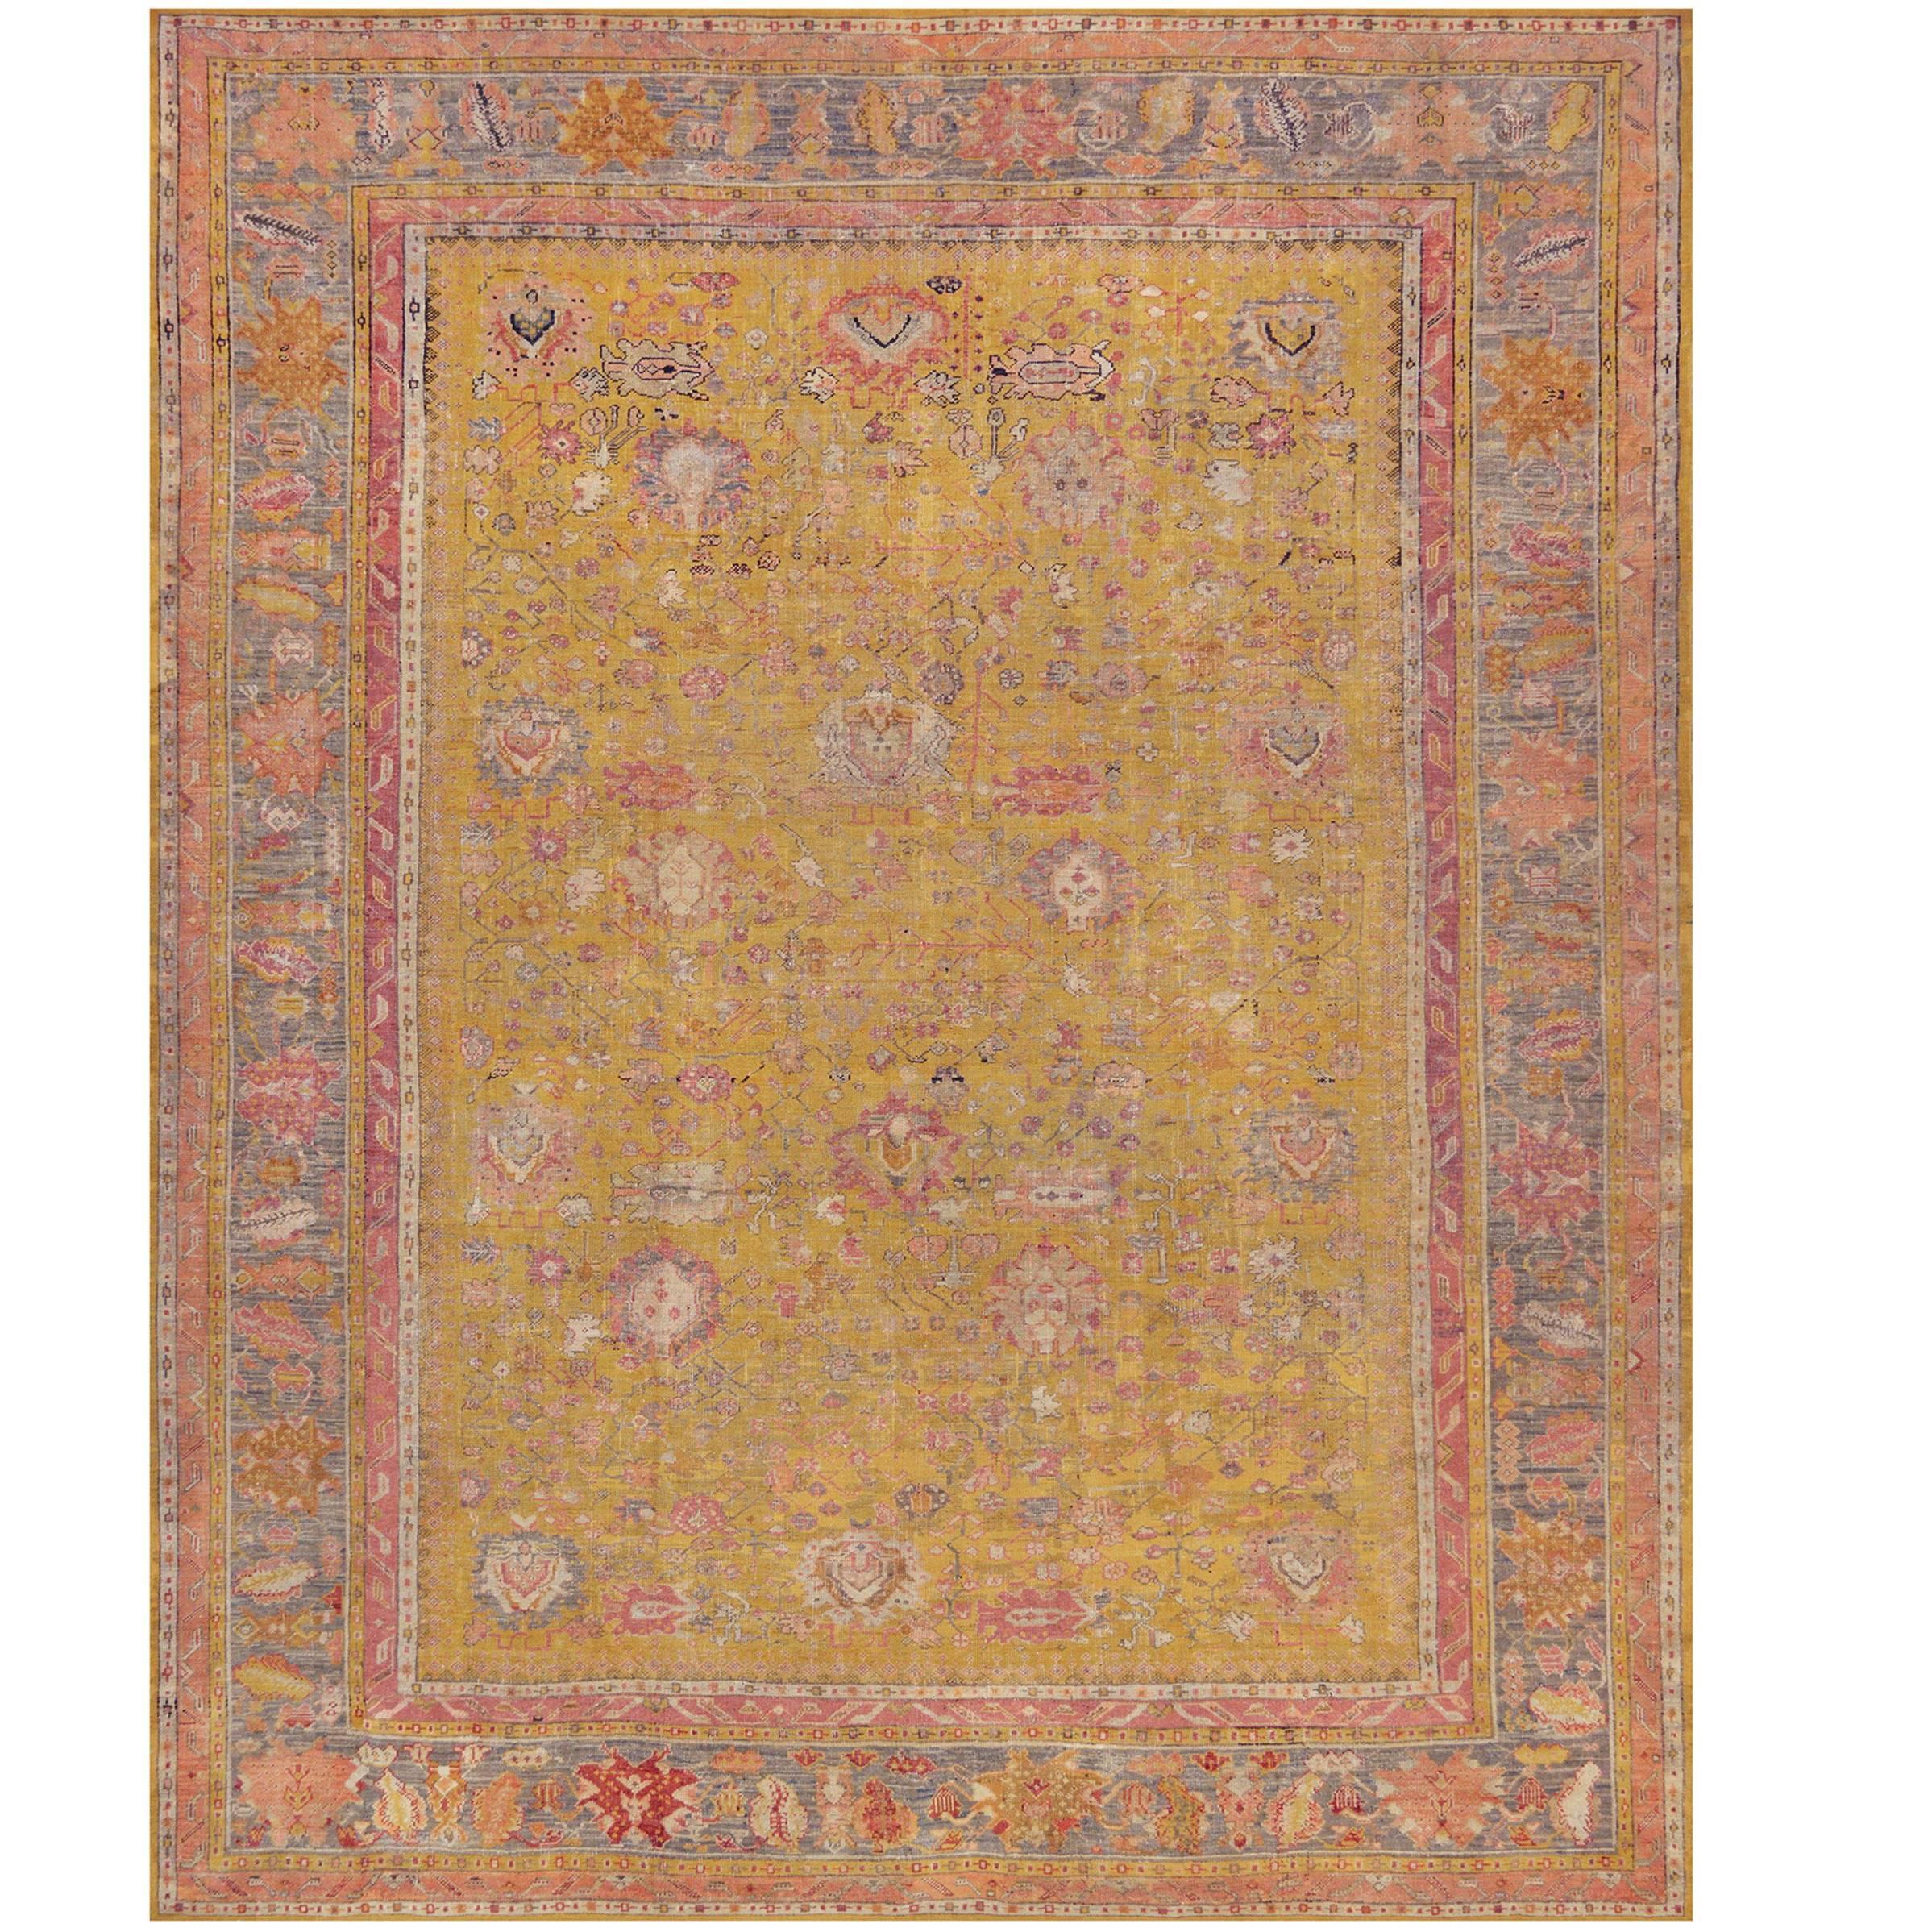 Late 19th Century Wool Hand-Woven Oushak Rug from West Anatolia